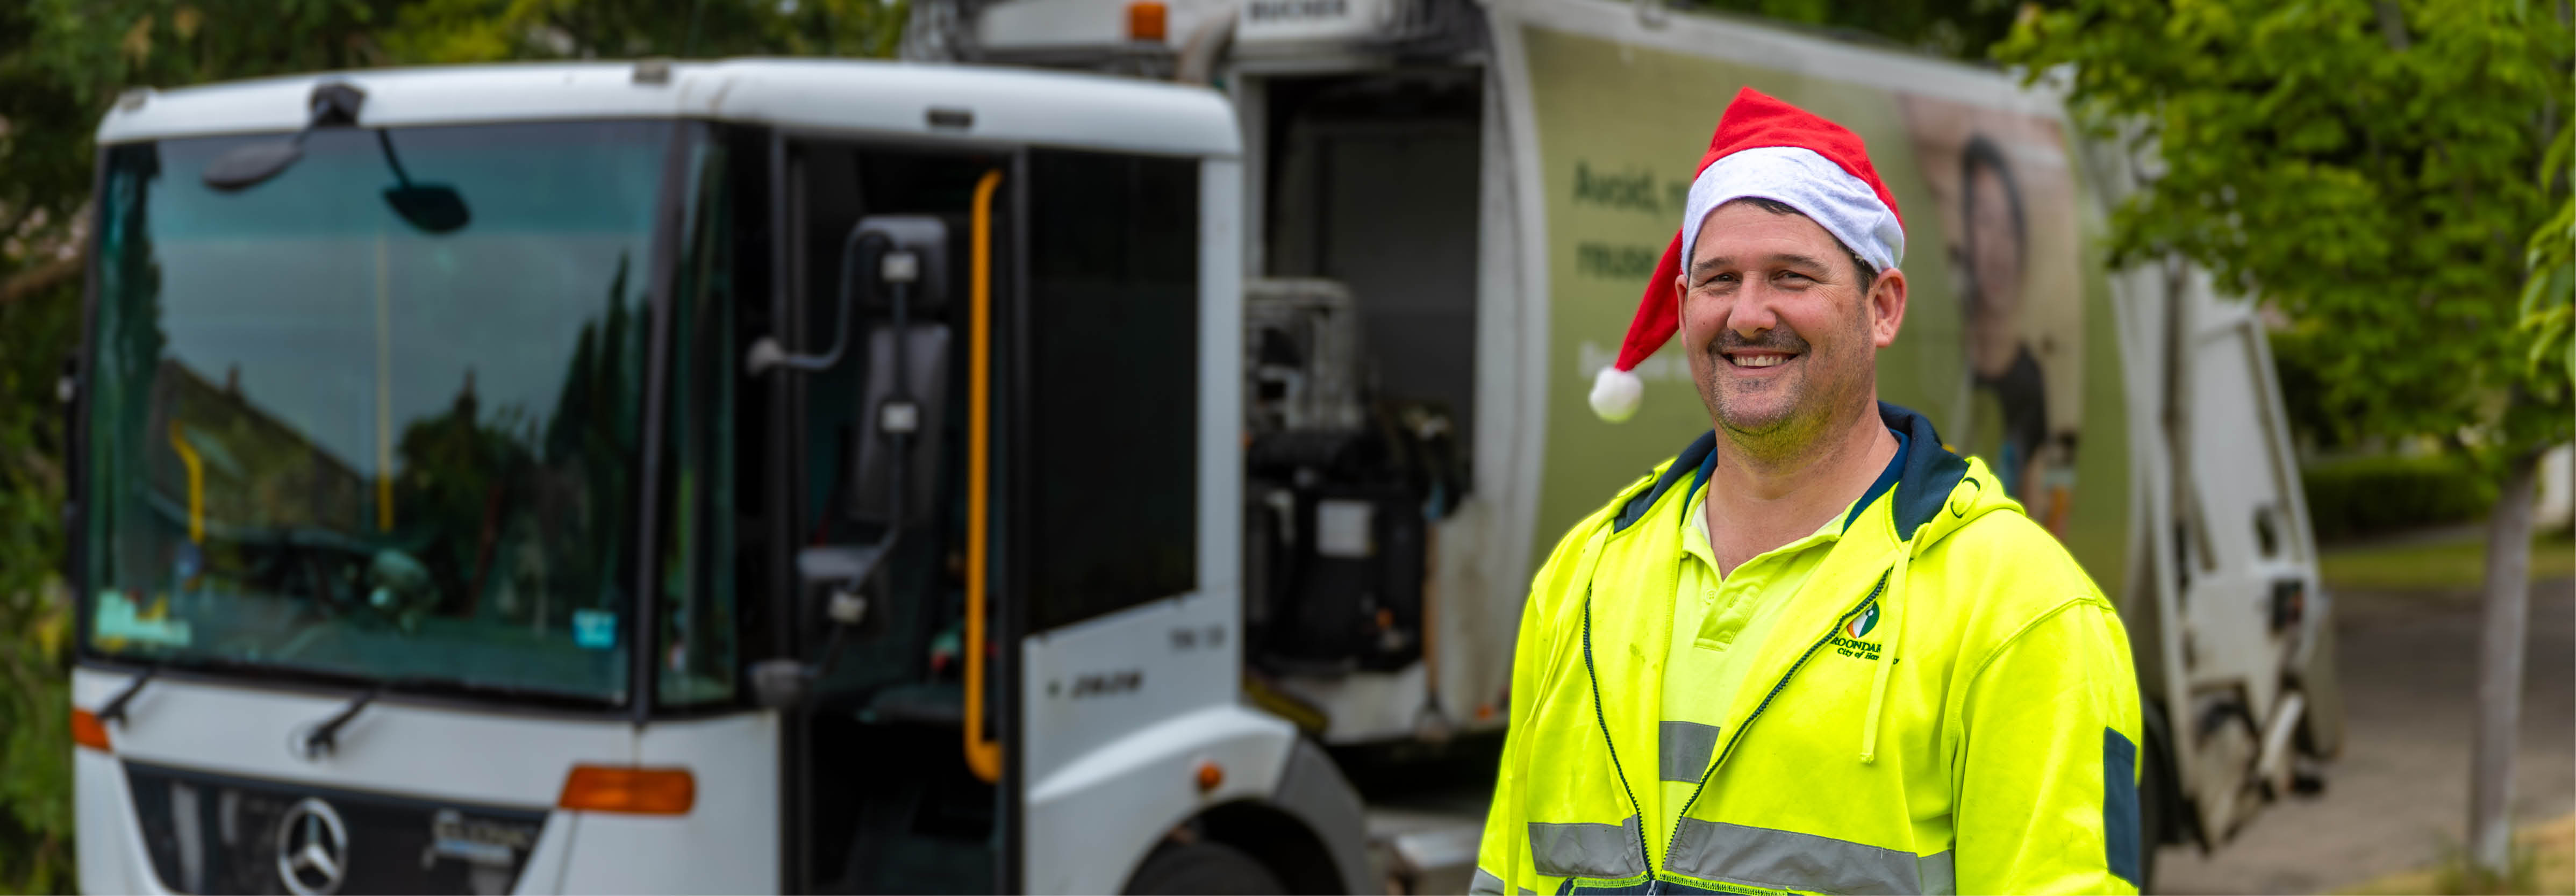 a man in high-vis shirt and santa hat smiles beside a garbage truck